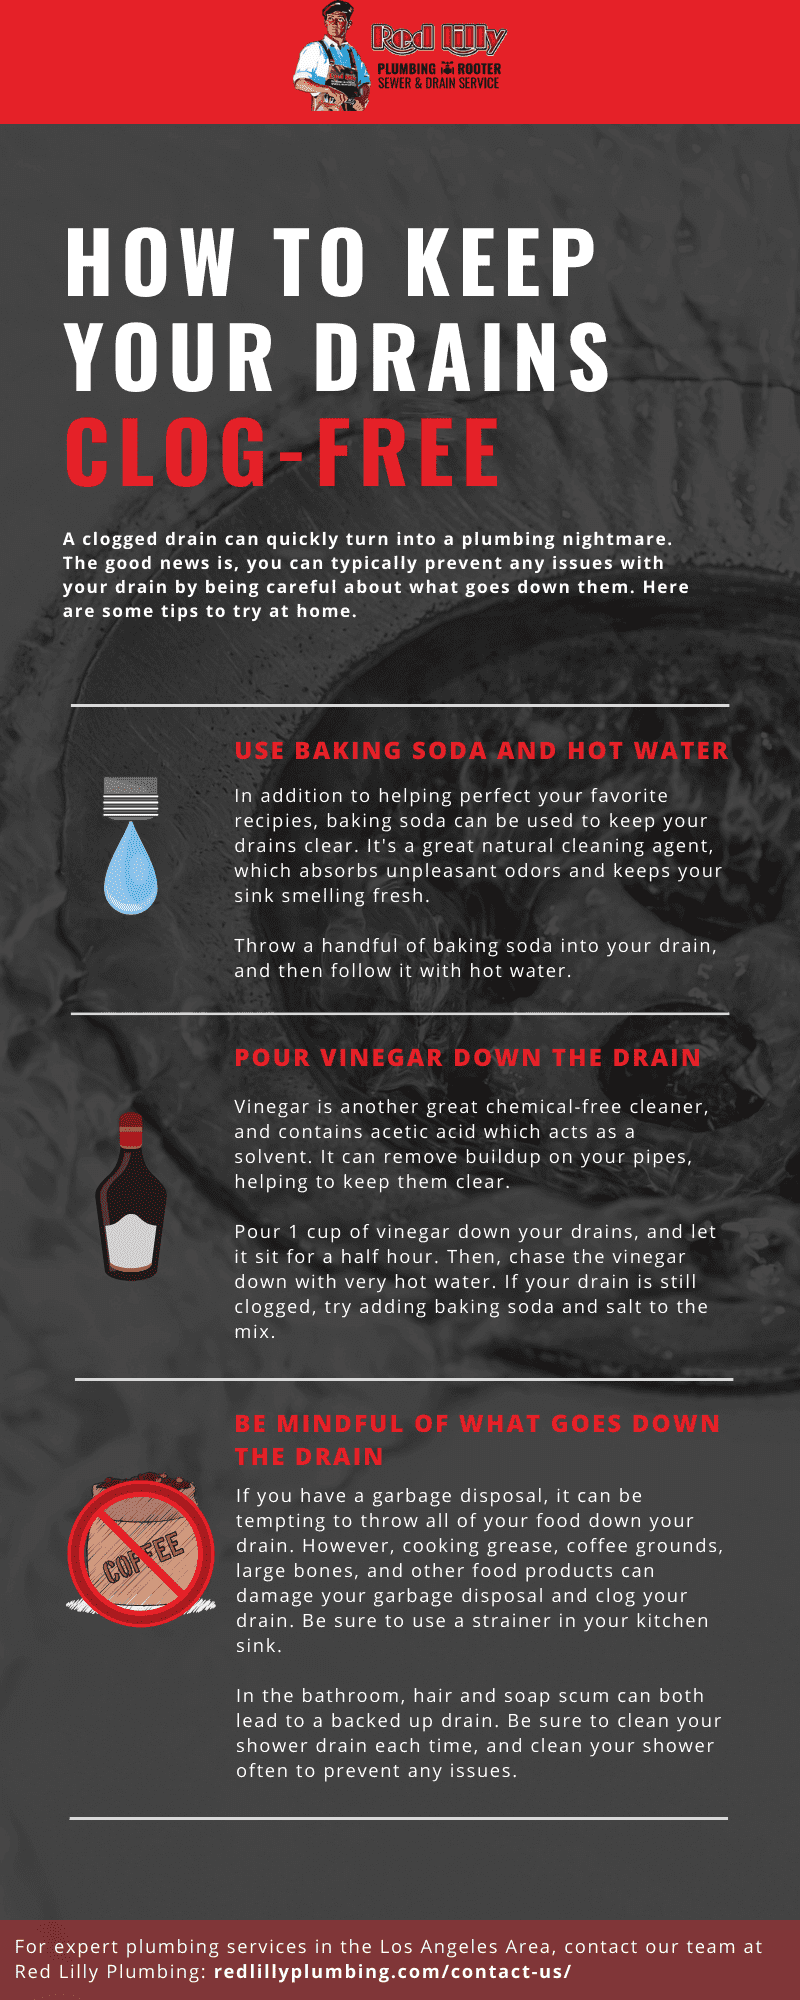 https://www.redlillyplumbing.com/images/Red-Lilly-How-to-Keep-Your-Drains-Clog-Free-infographic.2011301047550.png